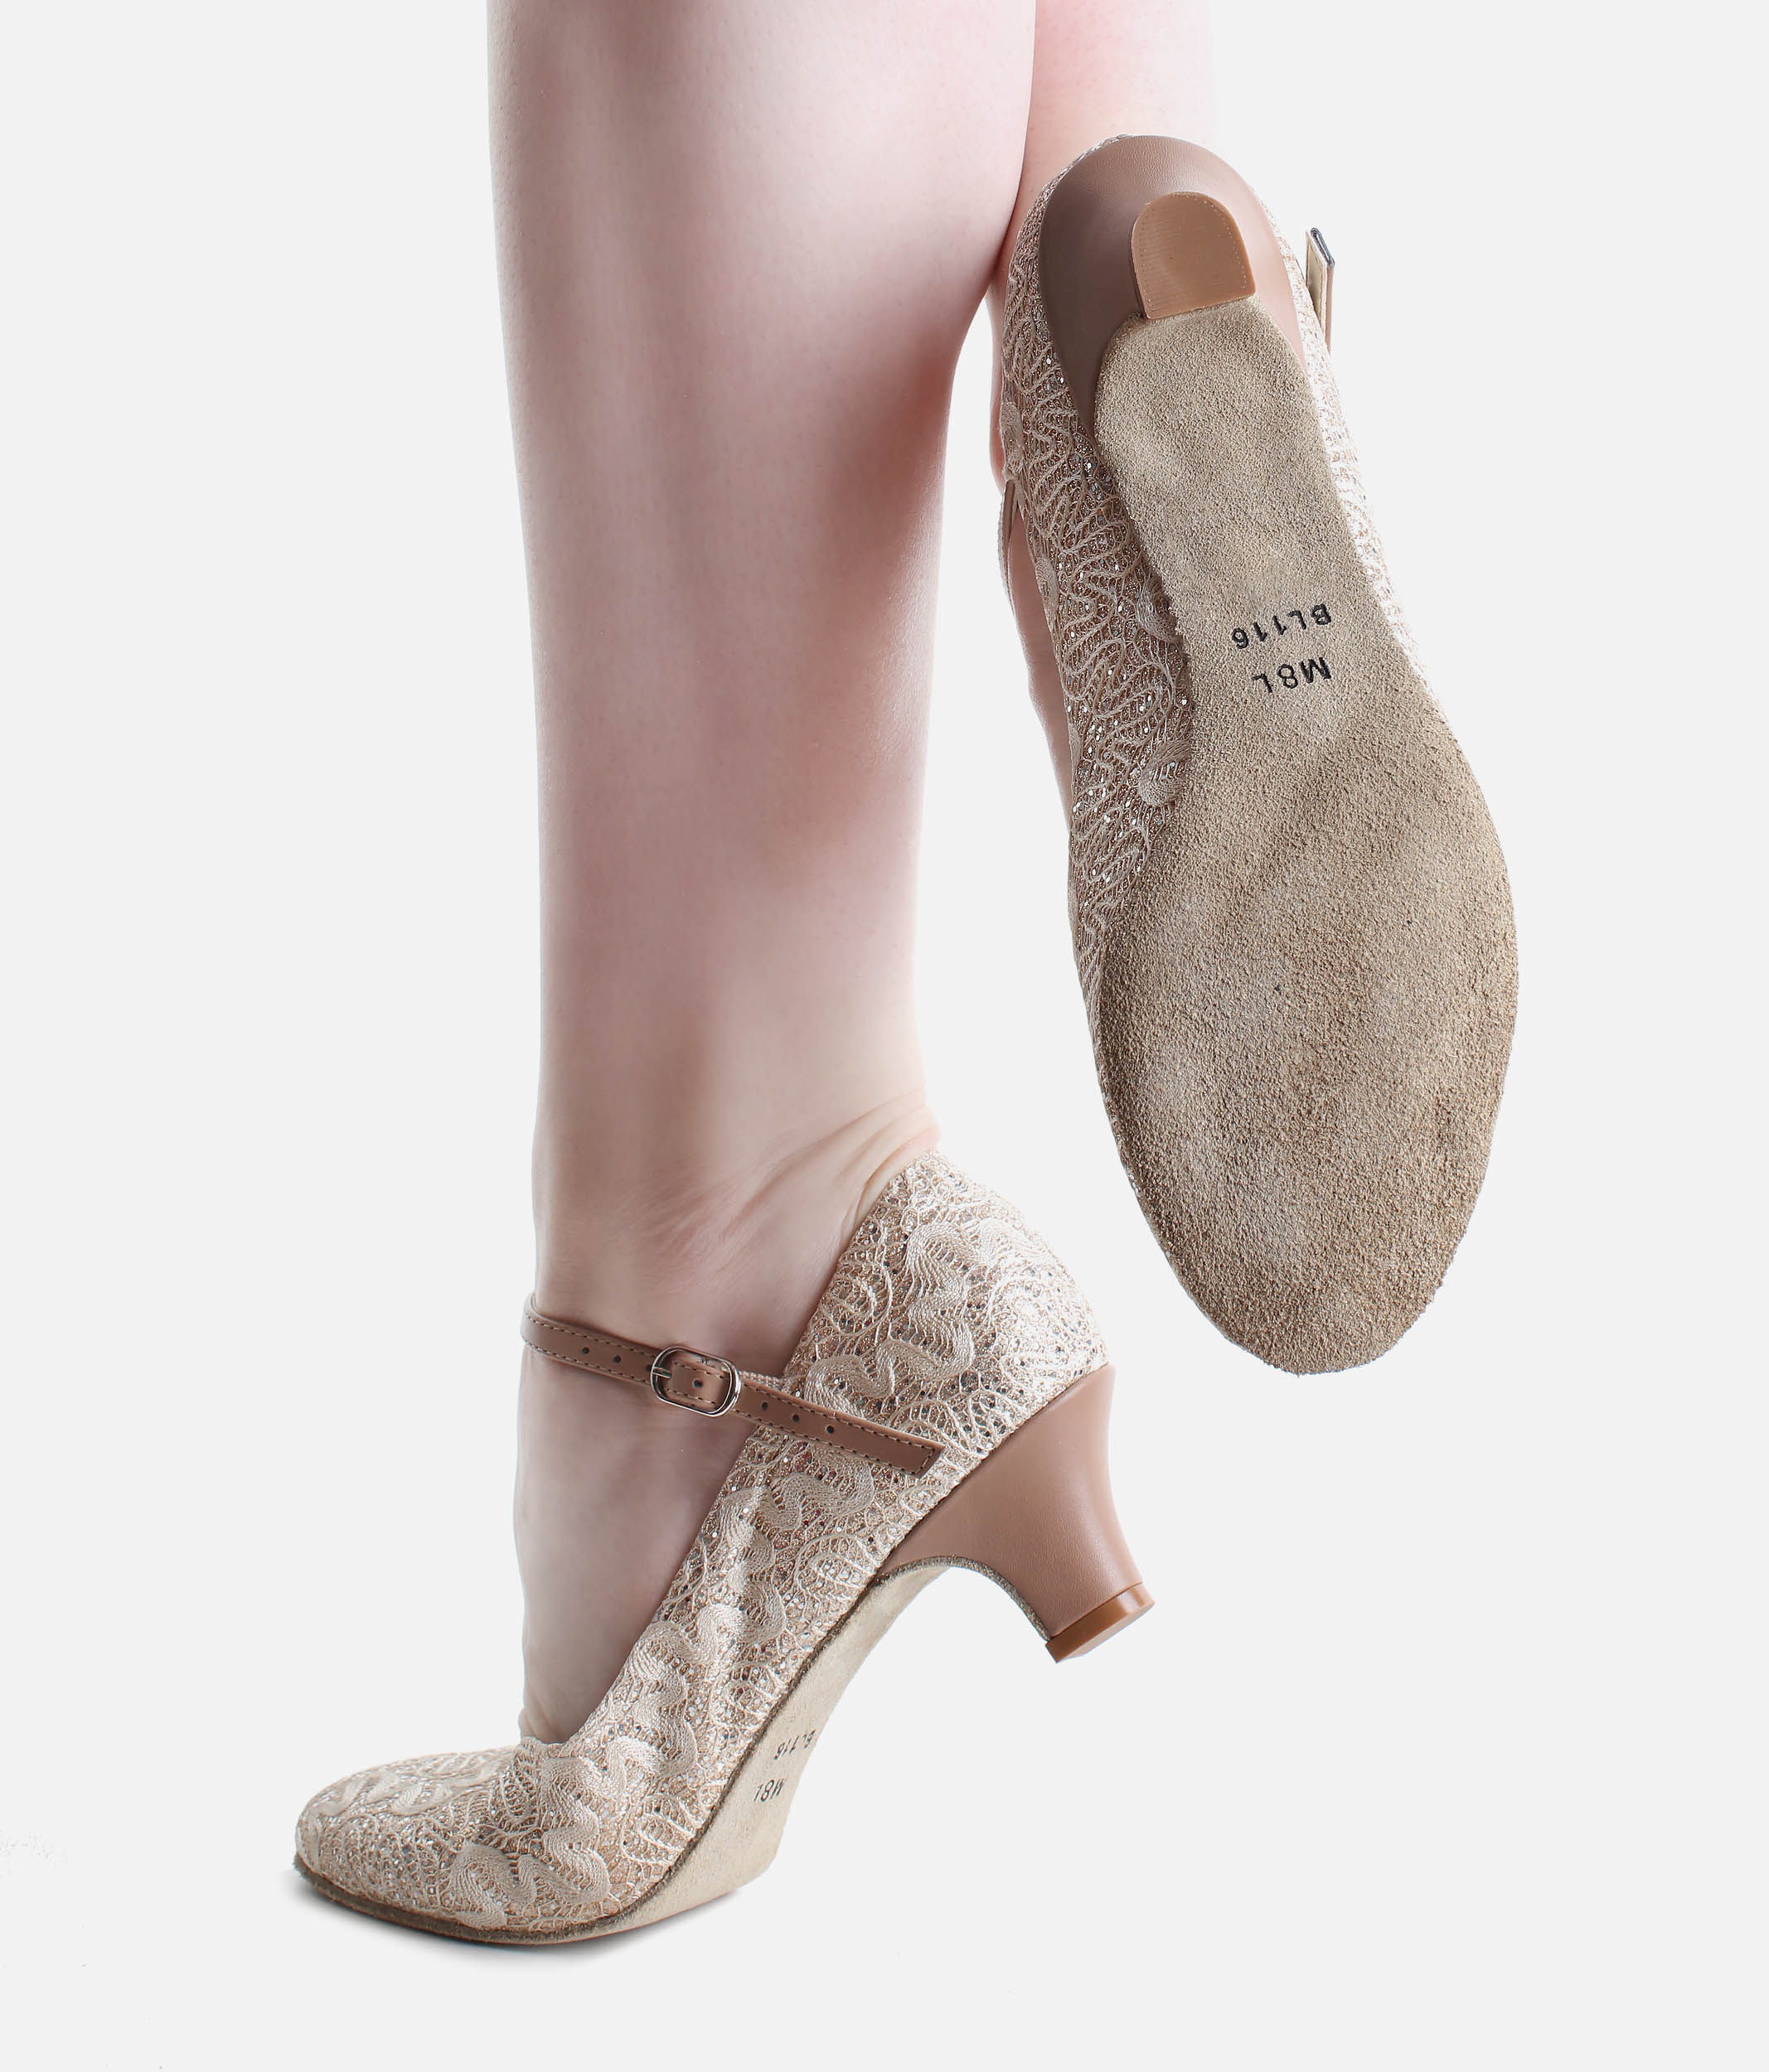 Barry's Dancewear featuring clothing from Capezio, Bloch, Russian Pointe  and many other brands.